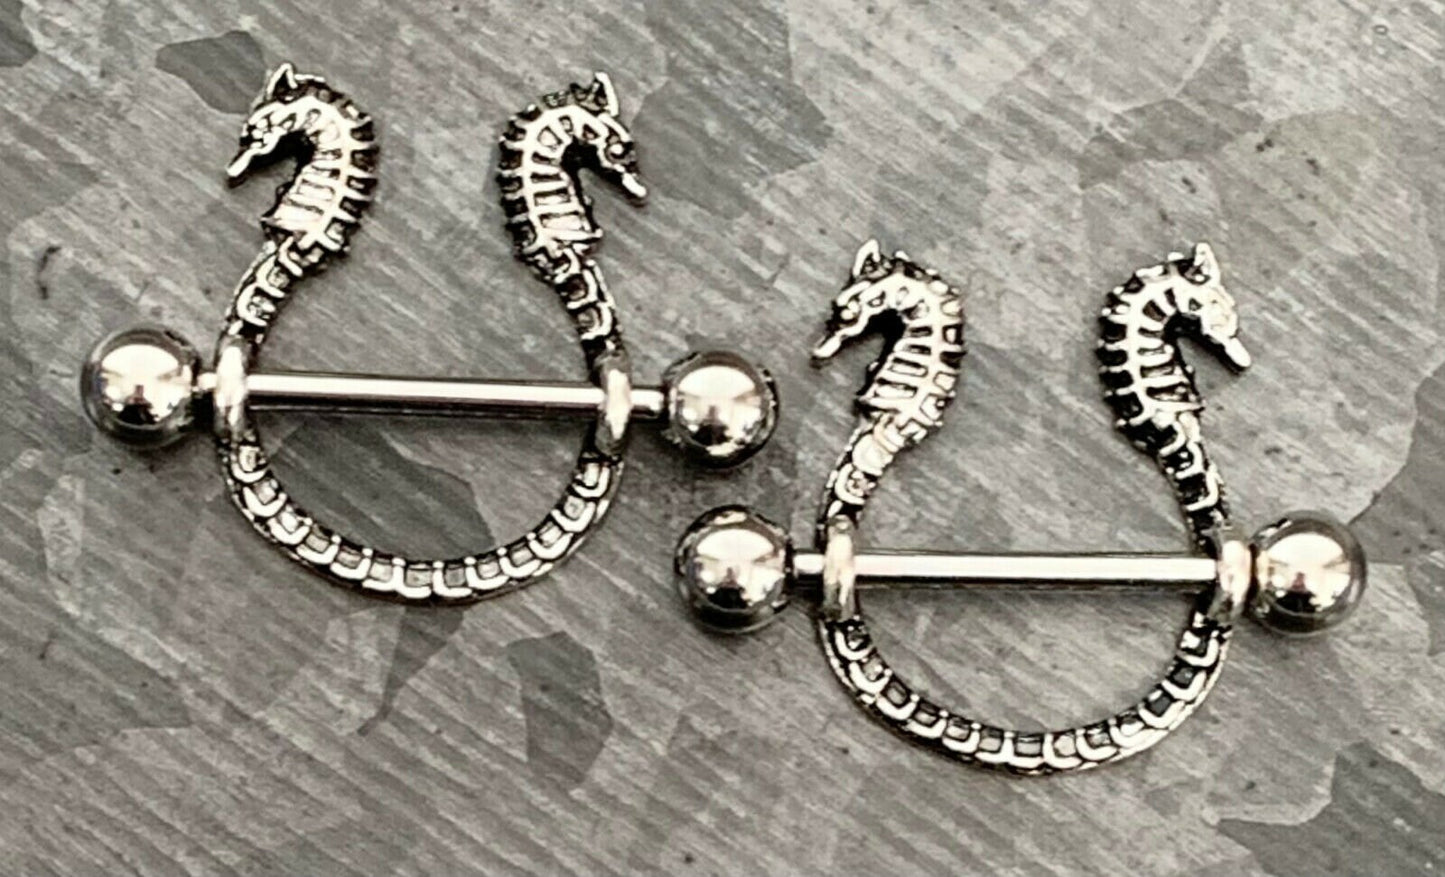 PAIR of Unique Seahorse Design Steel Nipple Barbells/Shields/Rings - Barbell 14g, 16mm (5/8") - Wearable length 14mm (9/16")!